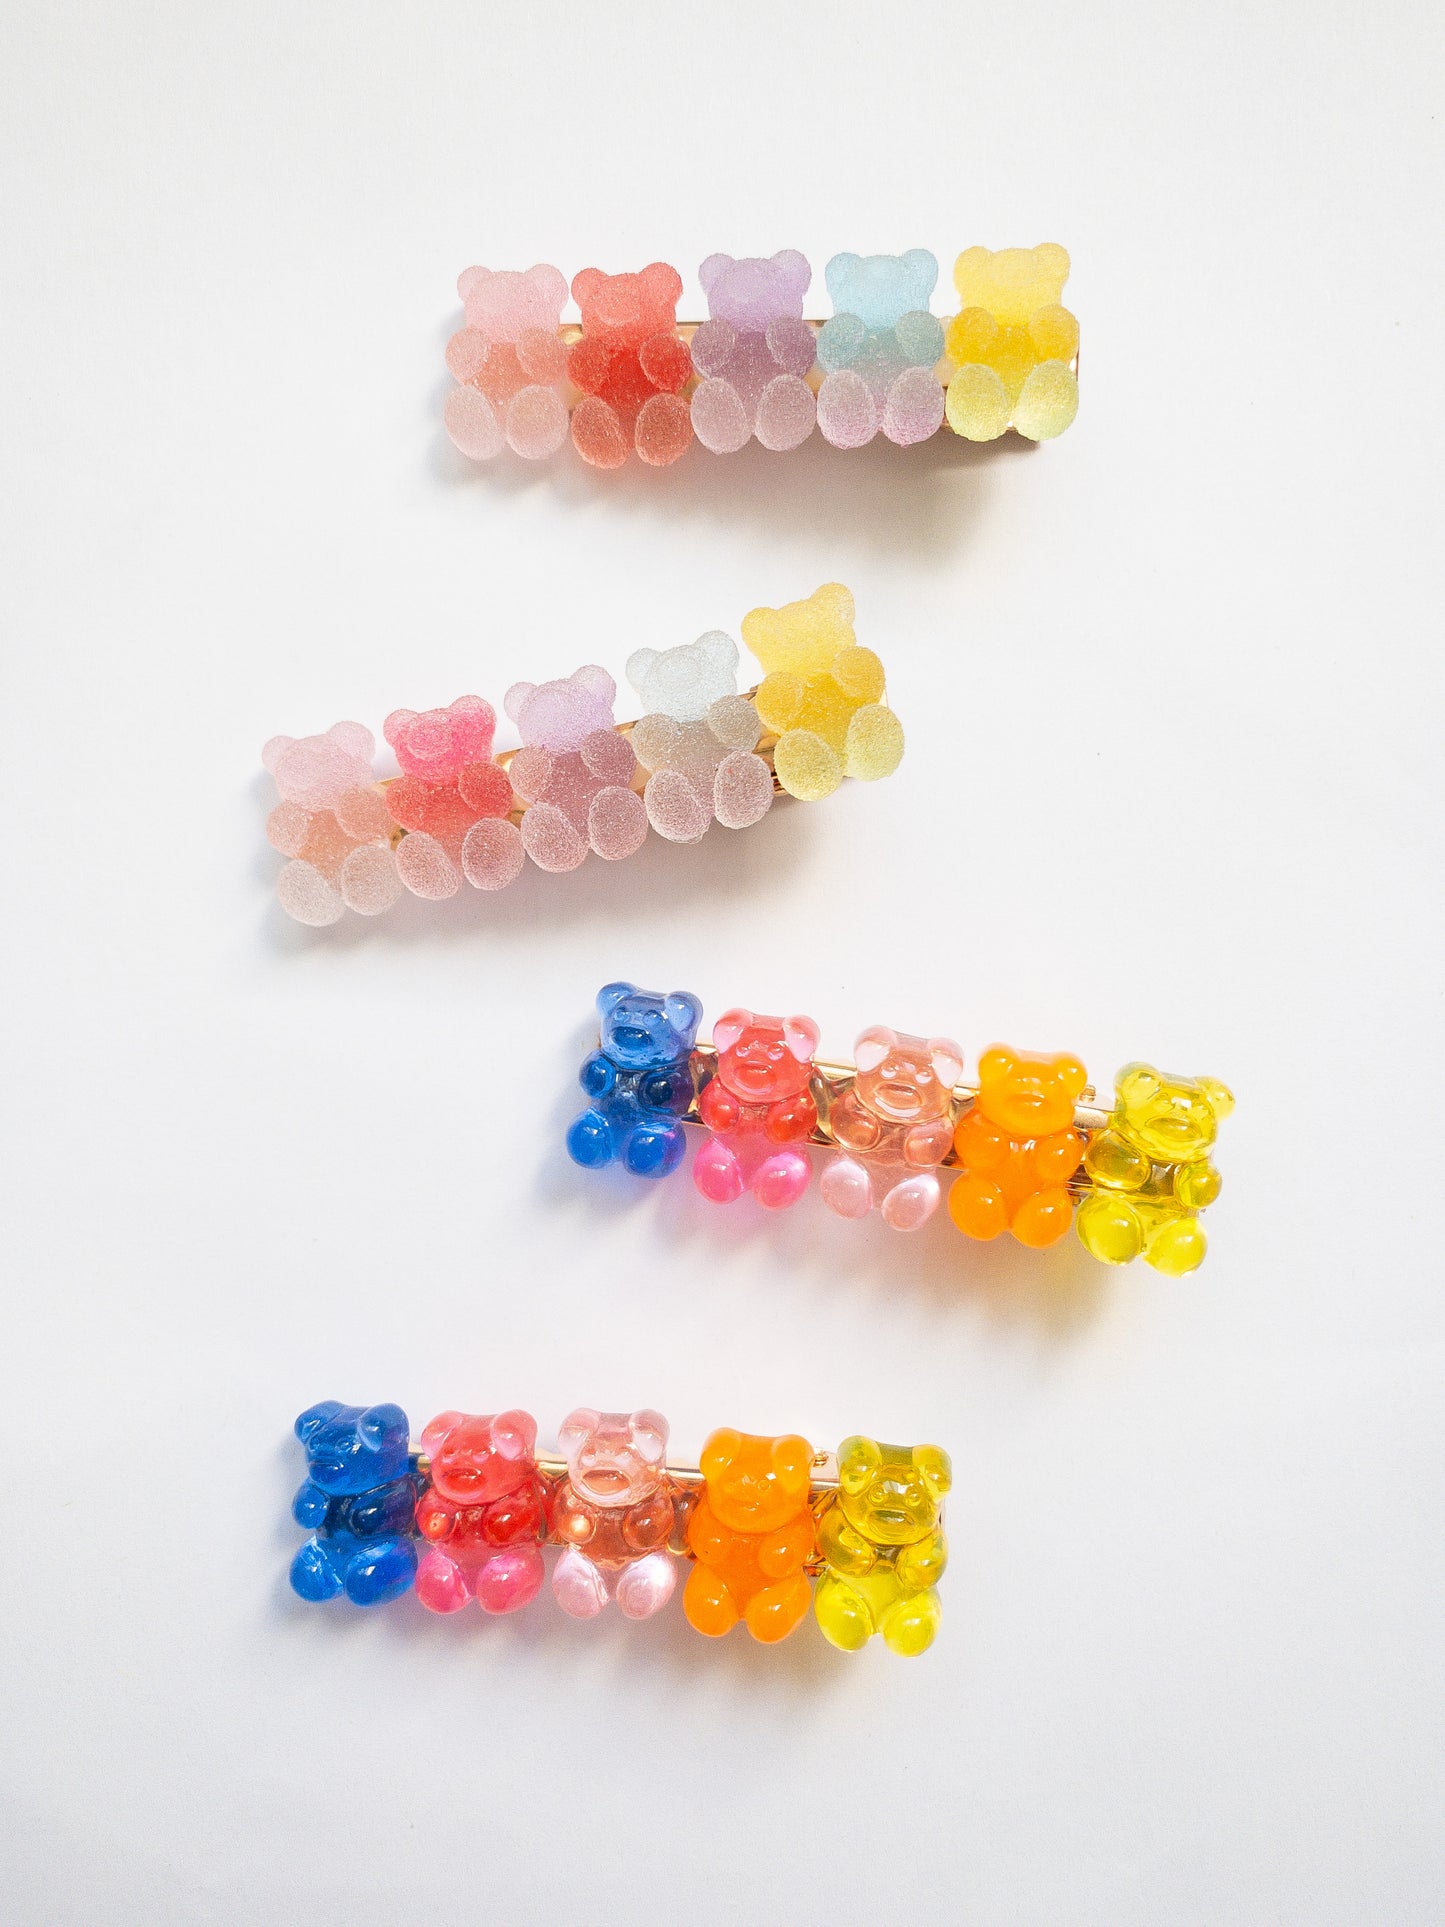 Yummy gummy bear family! The most adorable gummy bear shaped hair clips come as a 4 piece set: two frosted, sugary gummy bears and two translucent rainbow colored gummy bears. Each is on a gold colored alligator clip. 